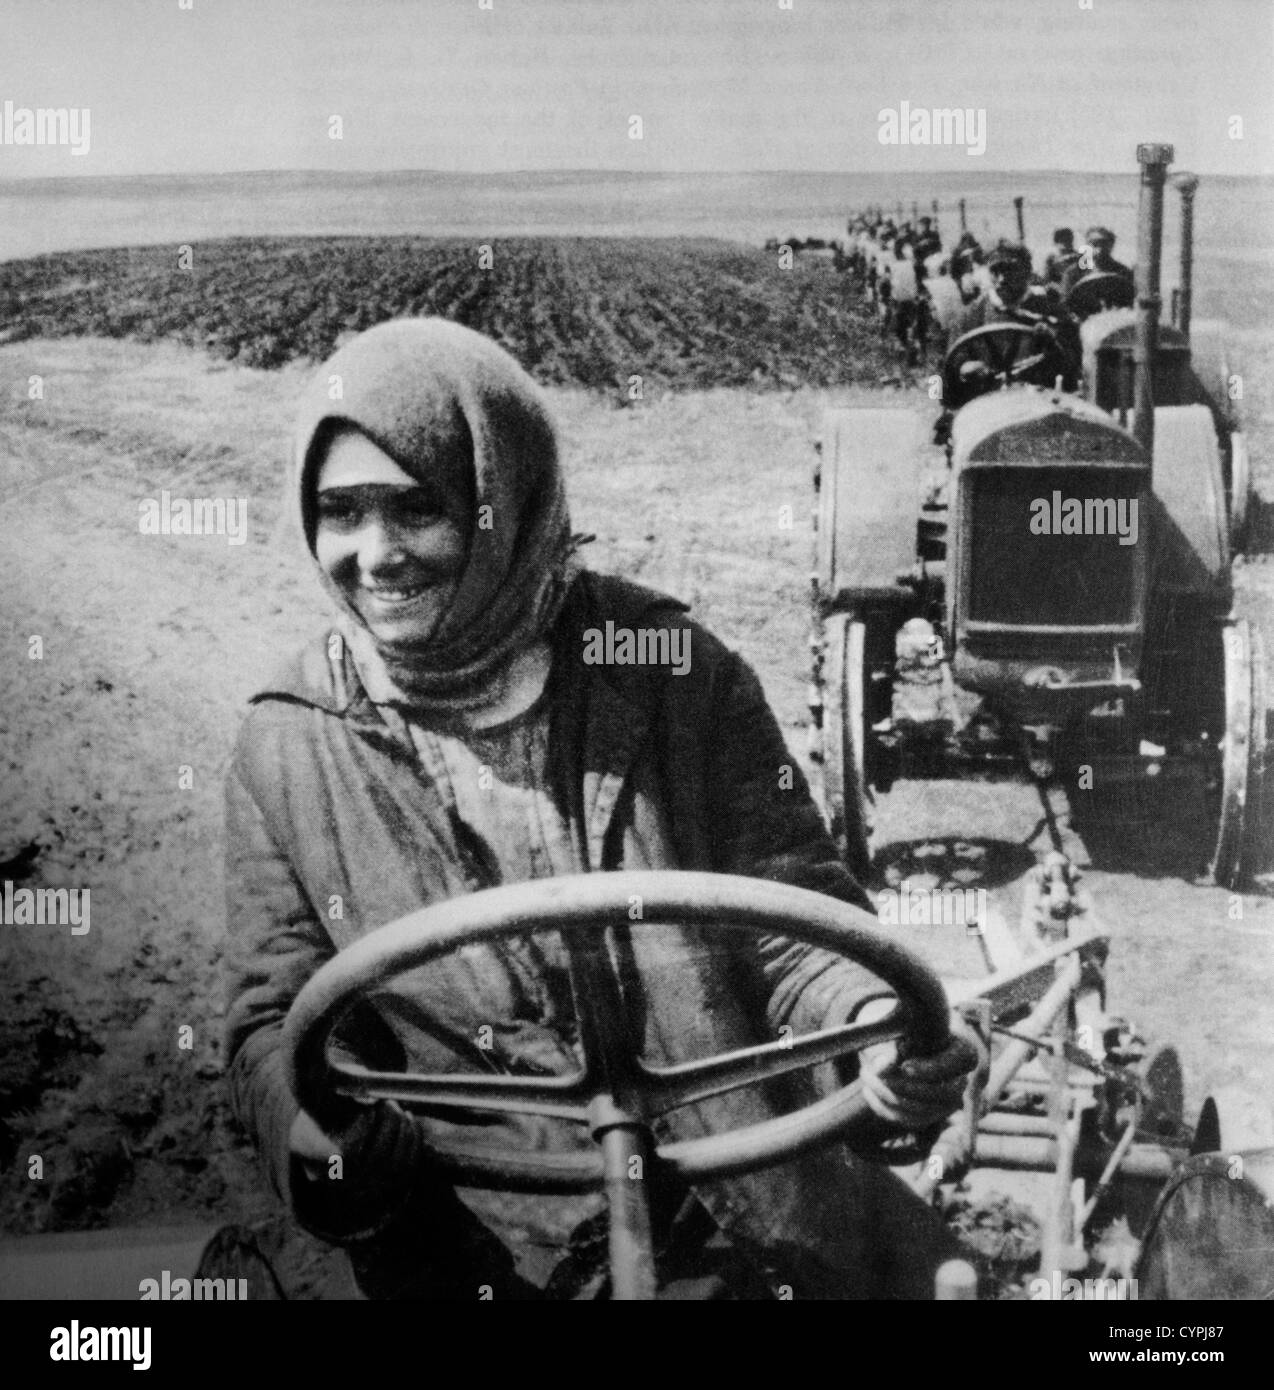 Woman Driving Tractor on Collective Farm, Soviet Union, 1928 Stock Photo